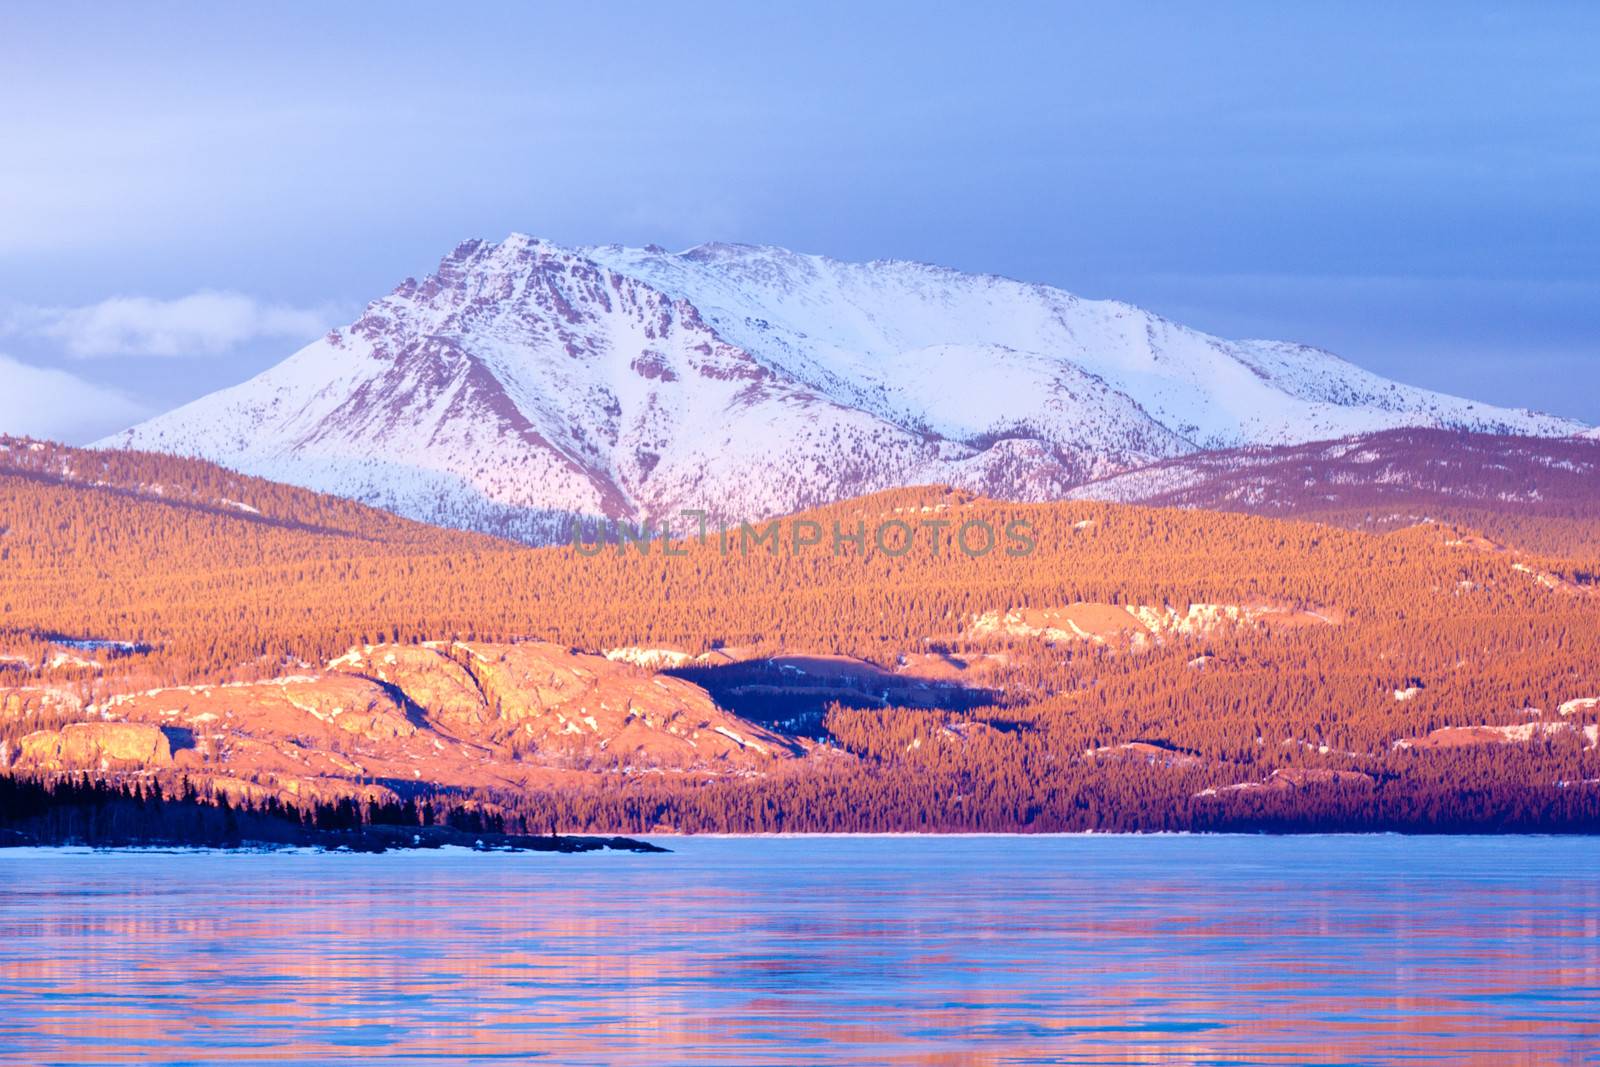 Warm evening light on snow-covered Mount Laurier on the eastern shore of frozen Lake Laberge Yukon Territory Canada